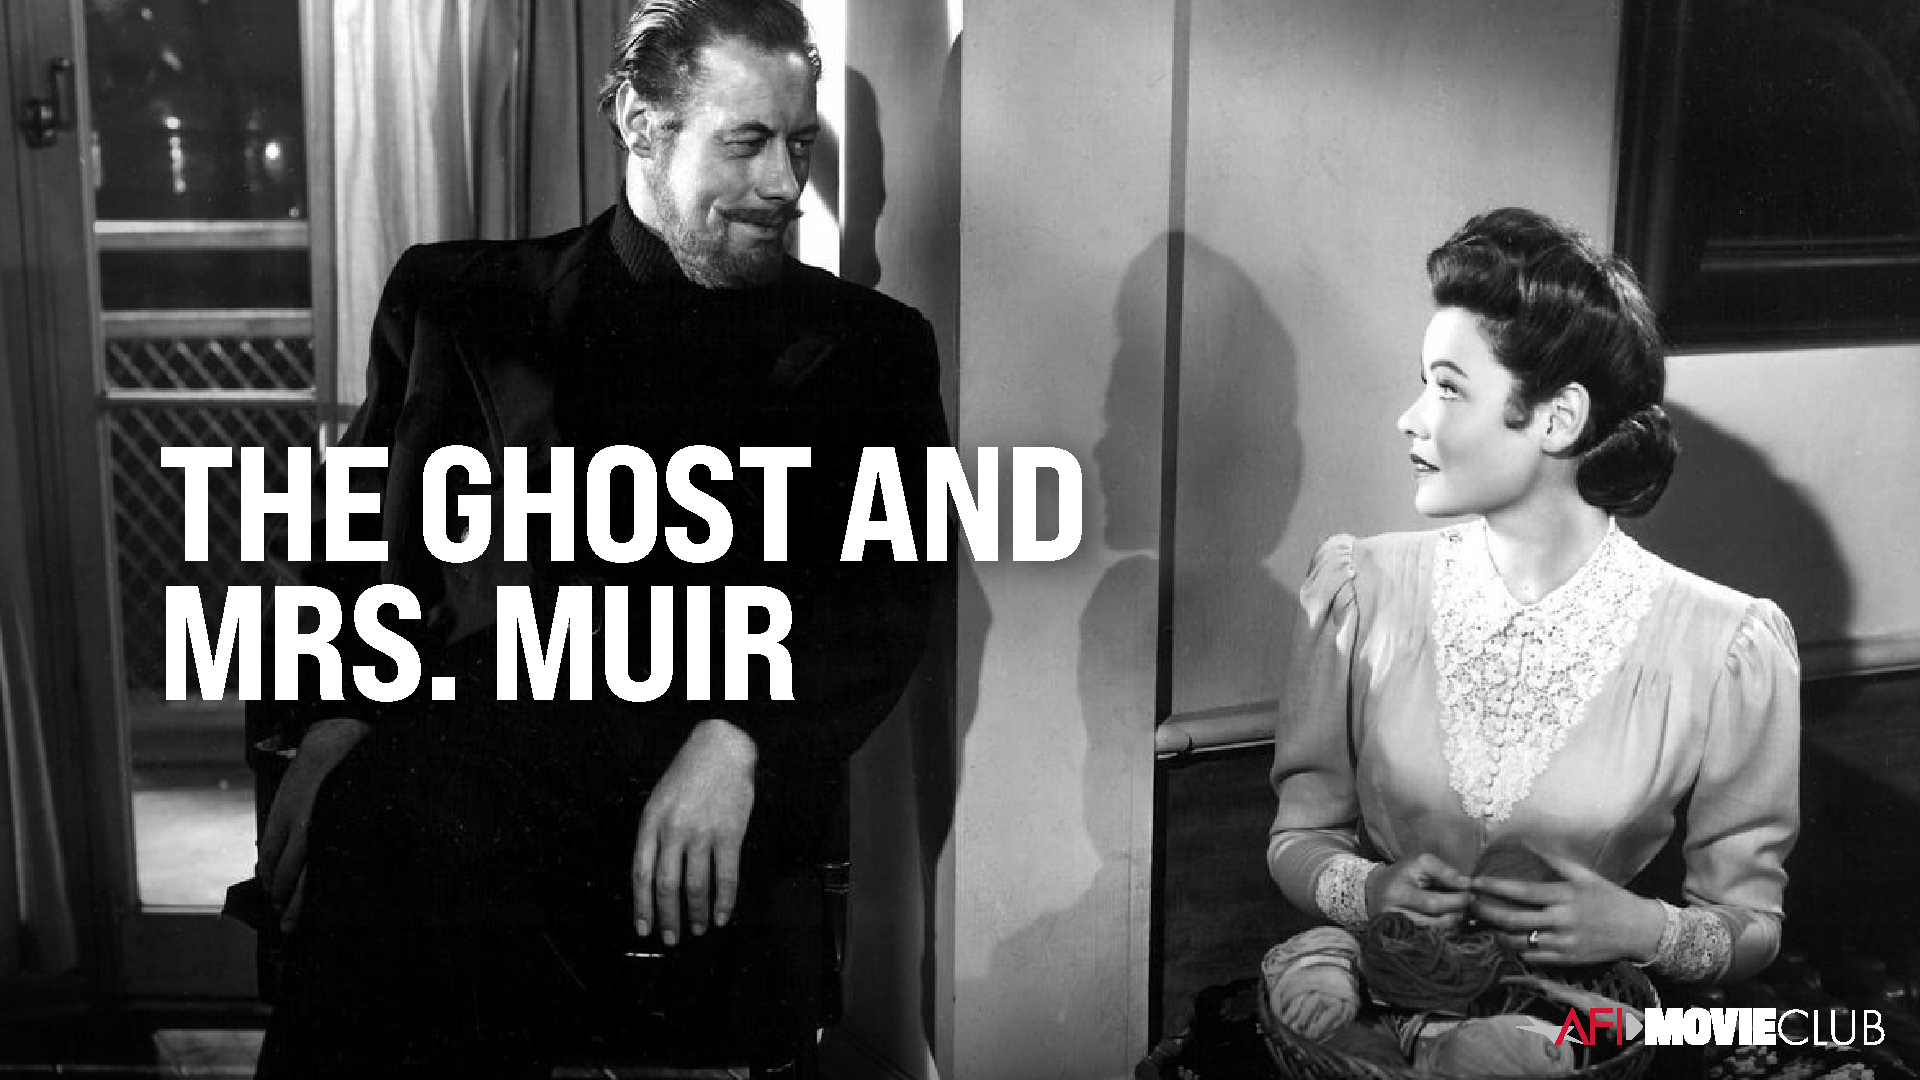 The Ghost and Mrs. Muir Film Still - Gene Tierney and Rex Harrison